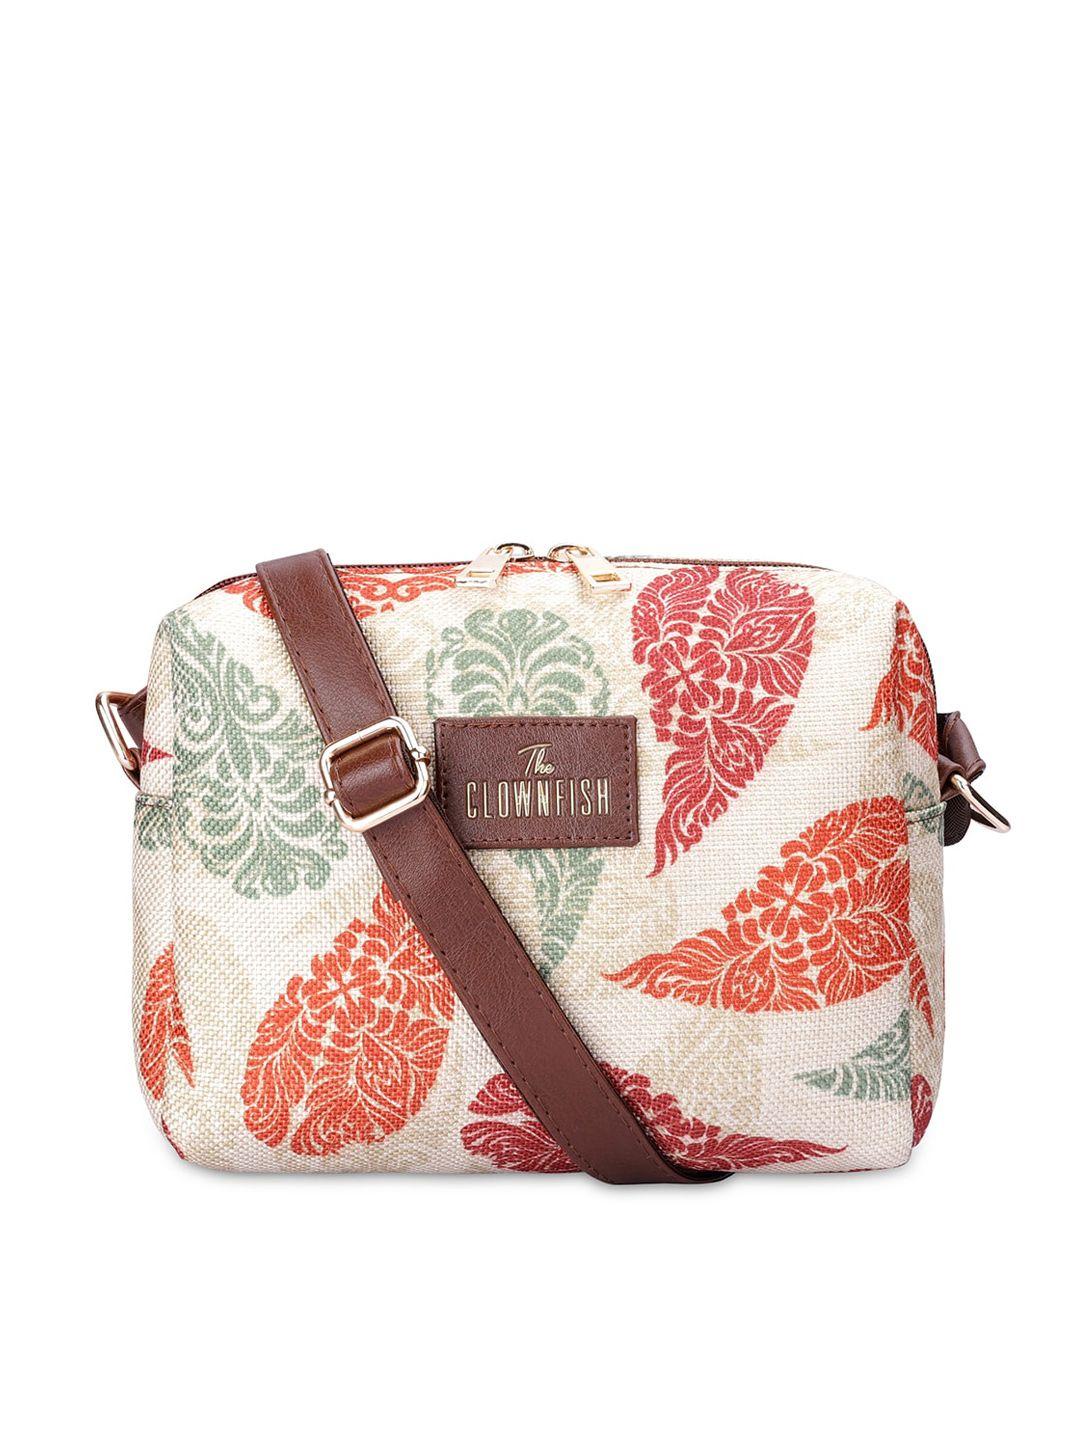 the clownfish printed jute structured sling bag